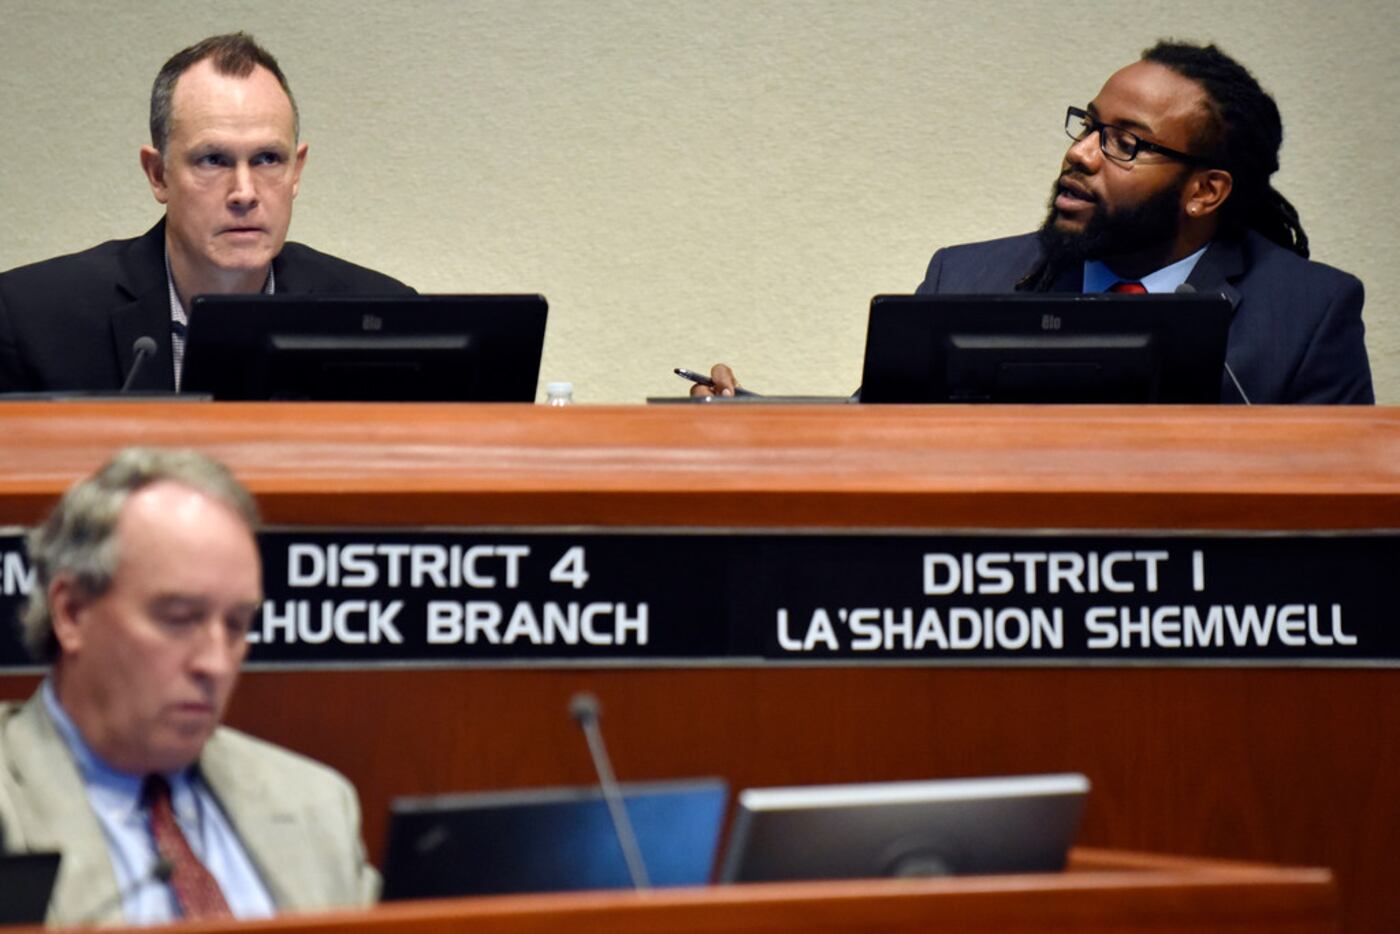 La'Shadion Shemwell (right) addresses the council during Tuesday's meeting as council member...